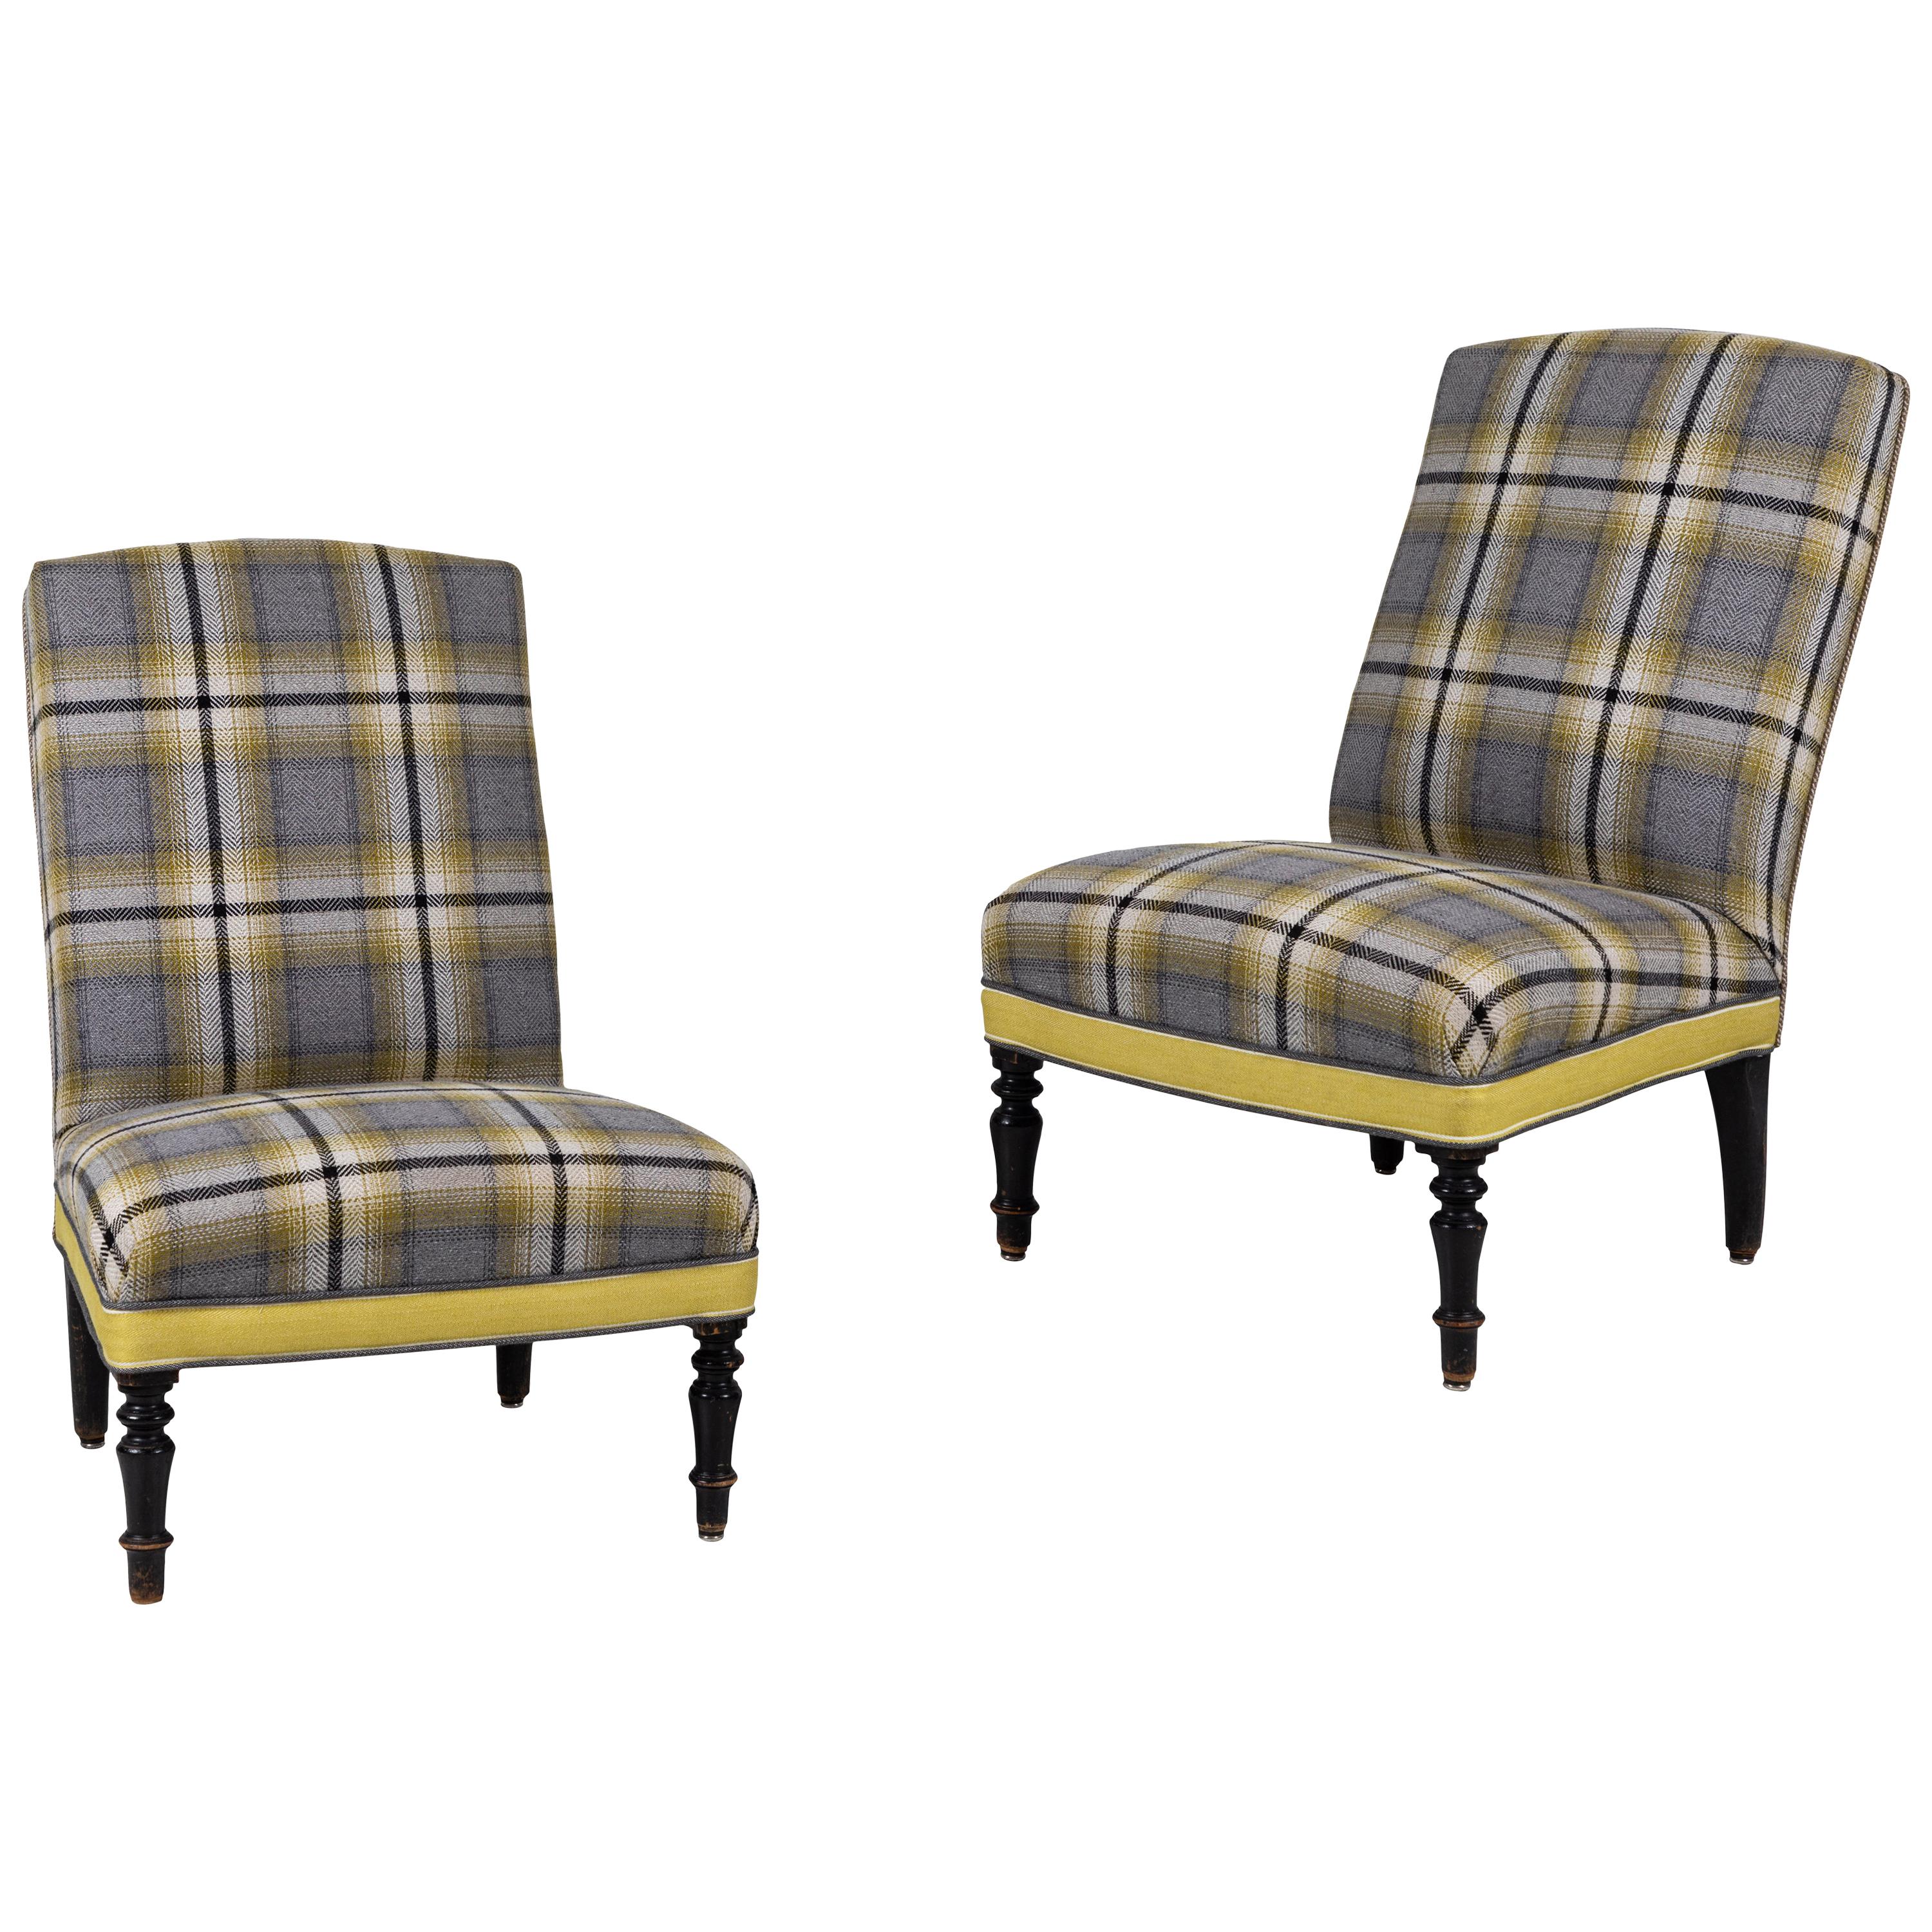 Pair of French Slipper Chairs in Yellow and Grey Plaid